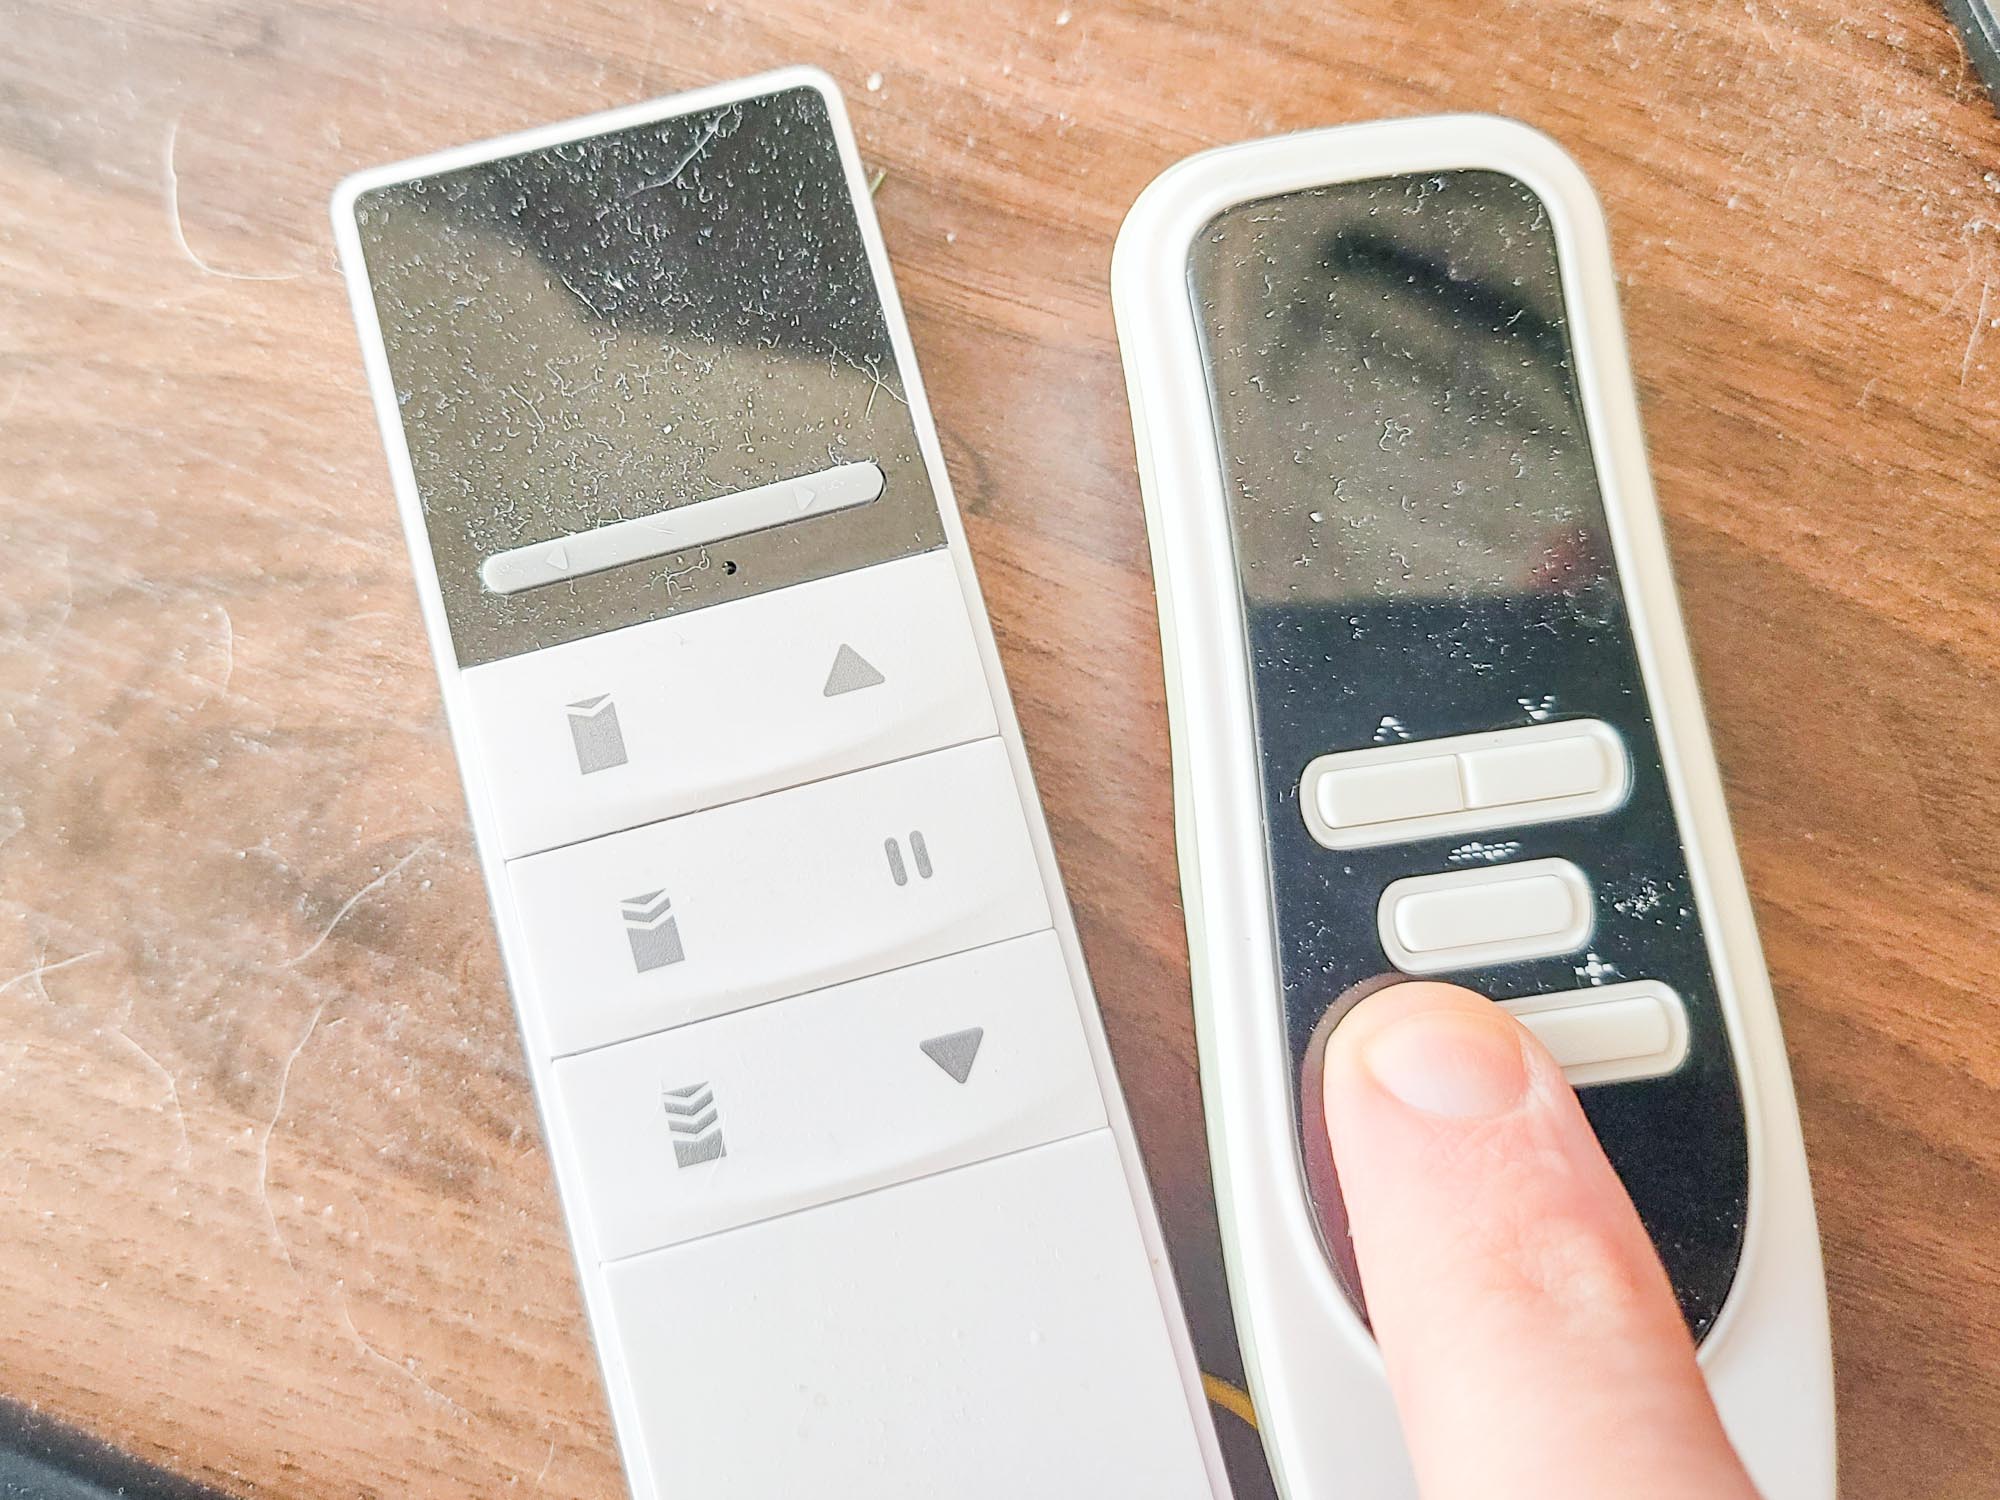 Remote Controls for Graywind Electric Drapes (Left) and Blinds (Right)